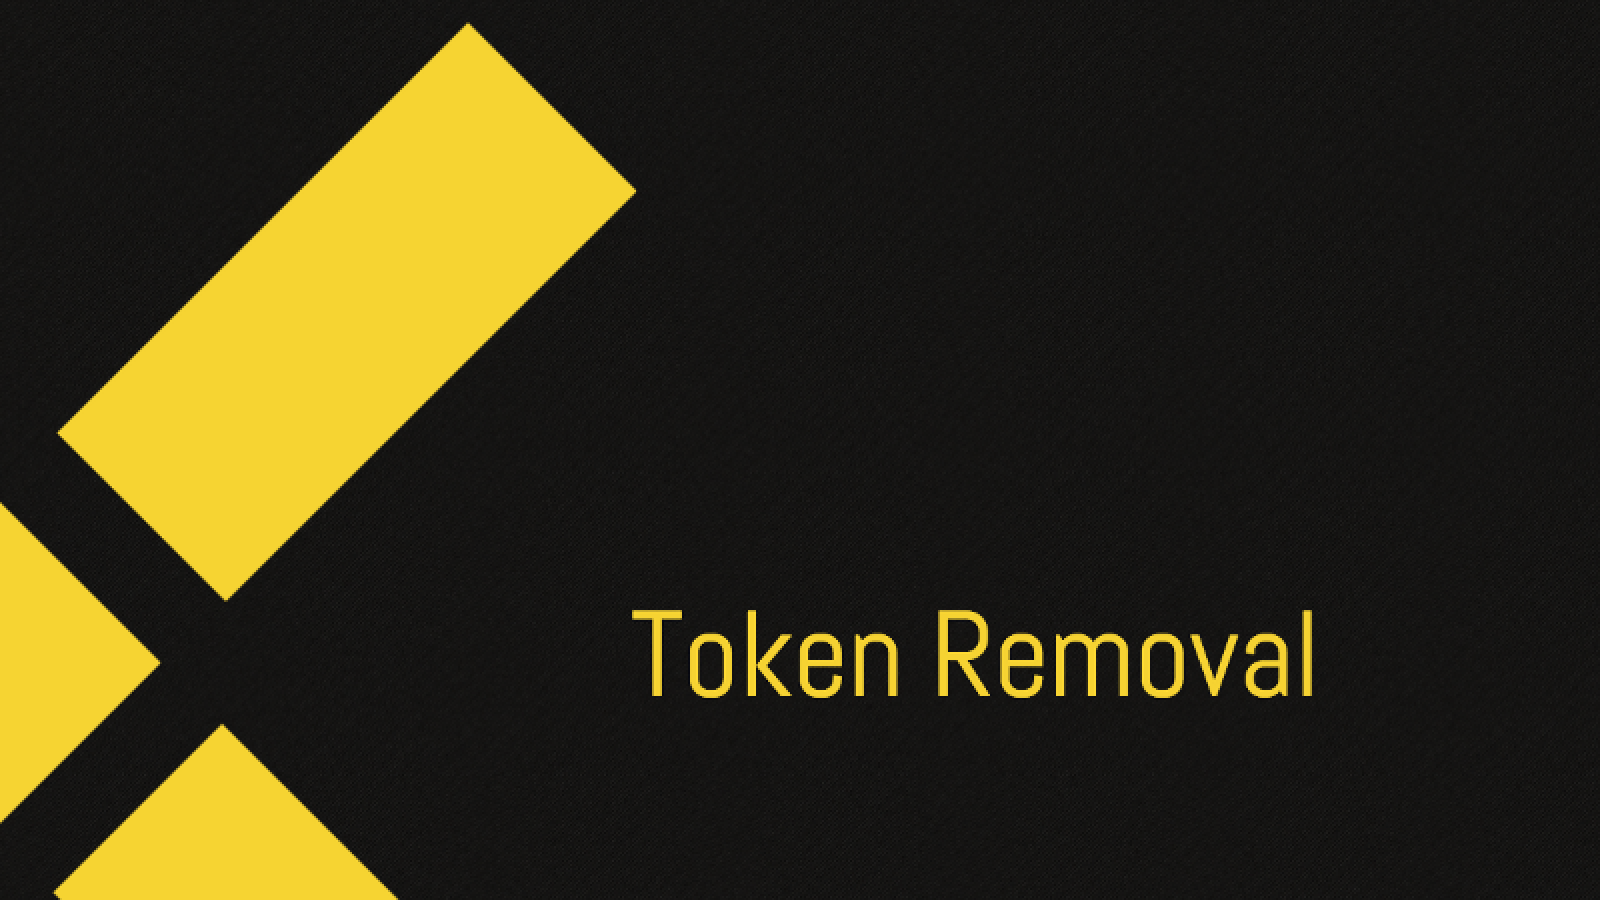 Pundi X Removes 9.7 Bln Tokens From Circulation